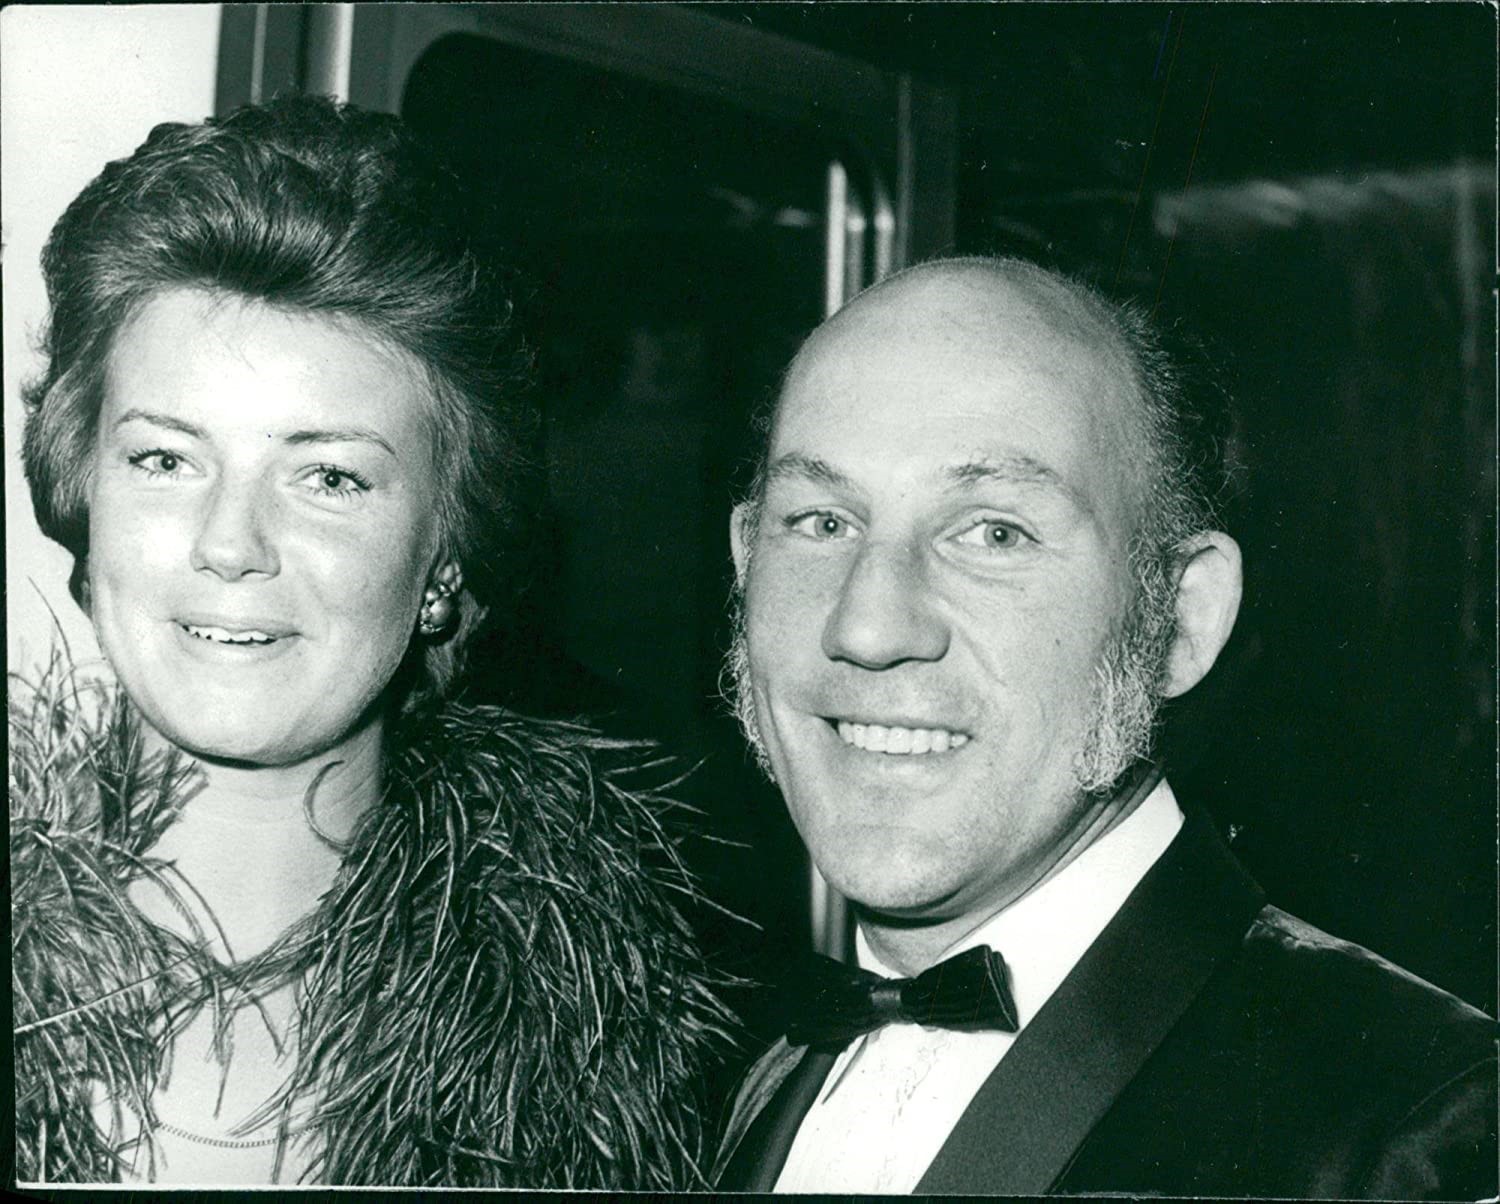 Stirling Moss with a woman.